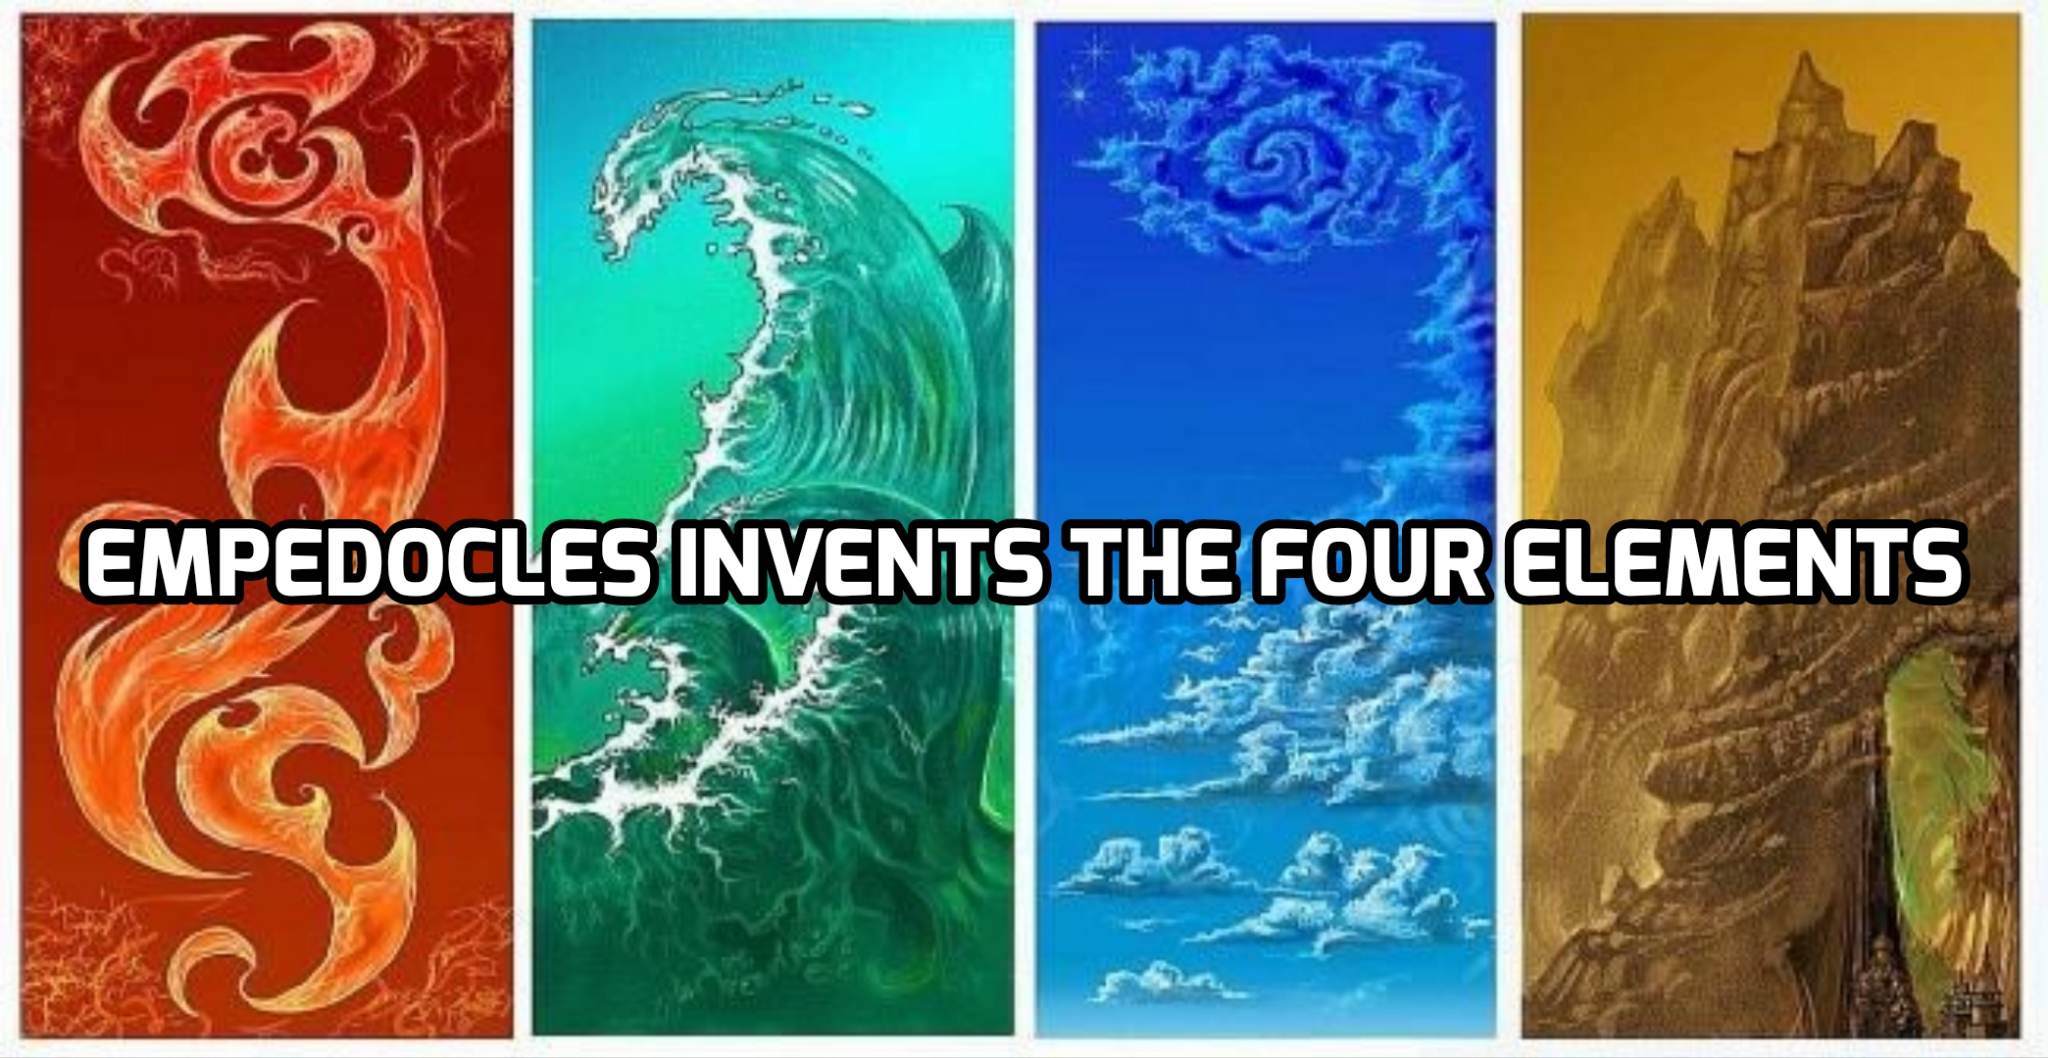 Empedocles Invents the Four Elements